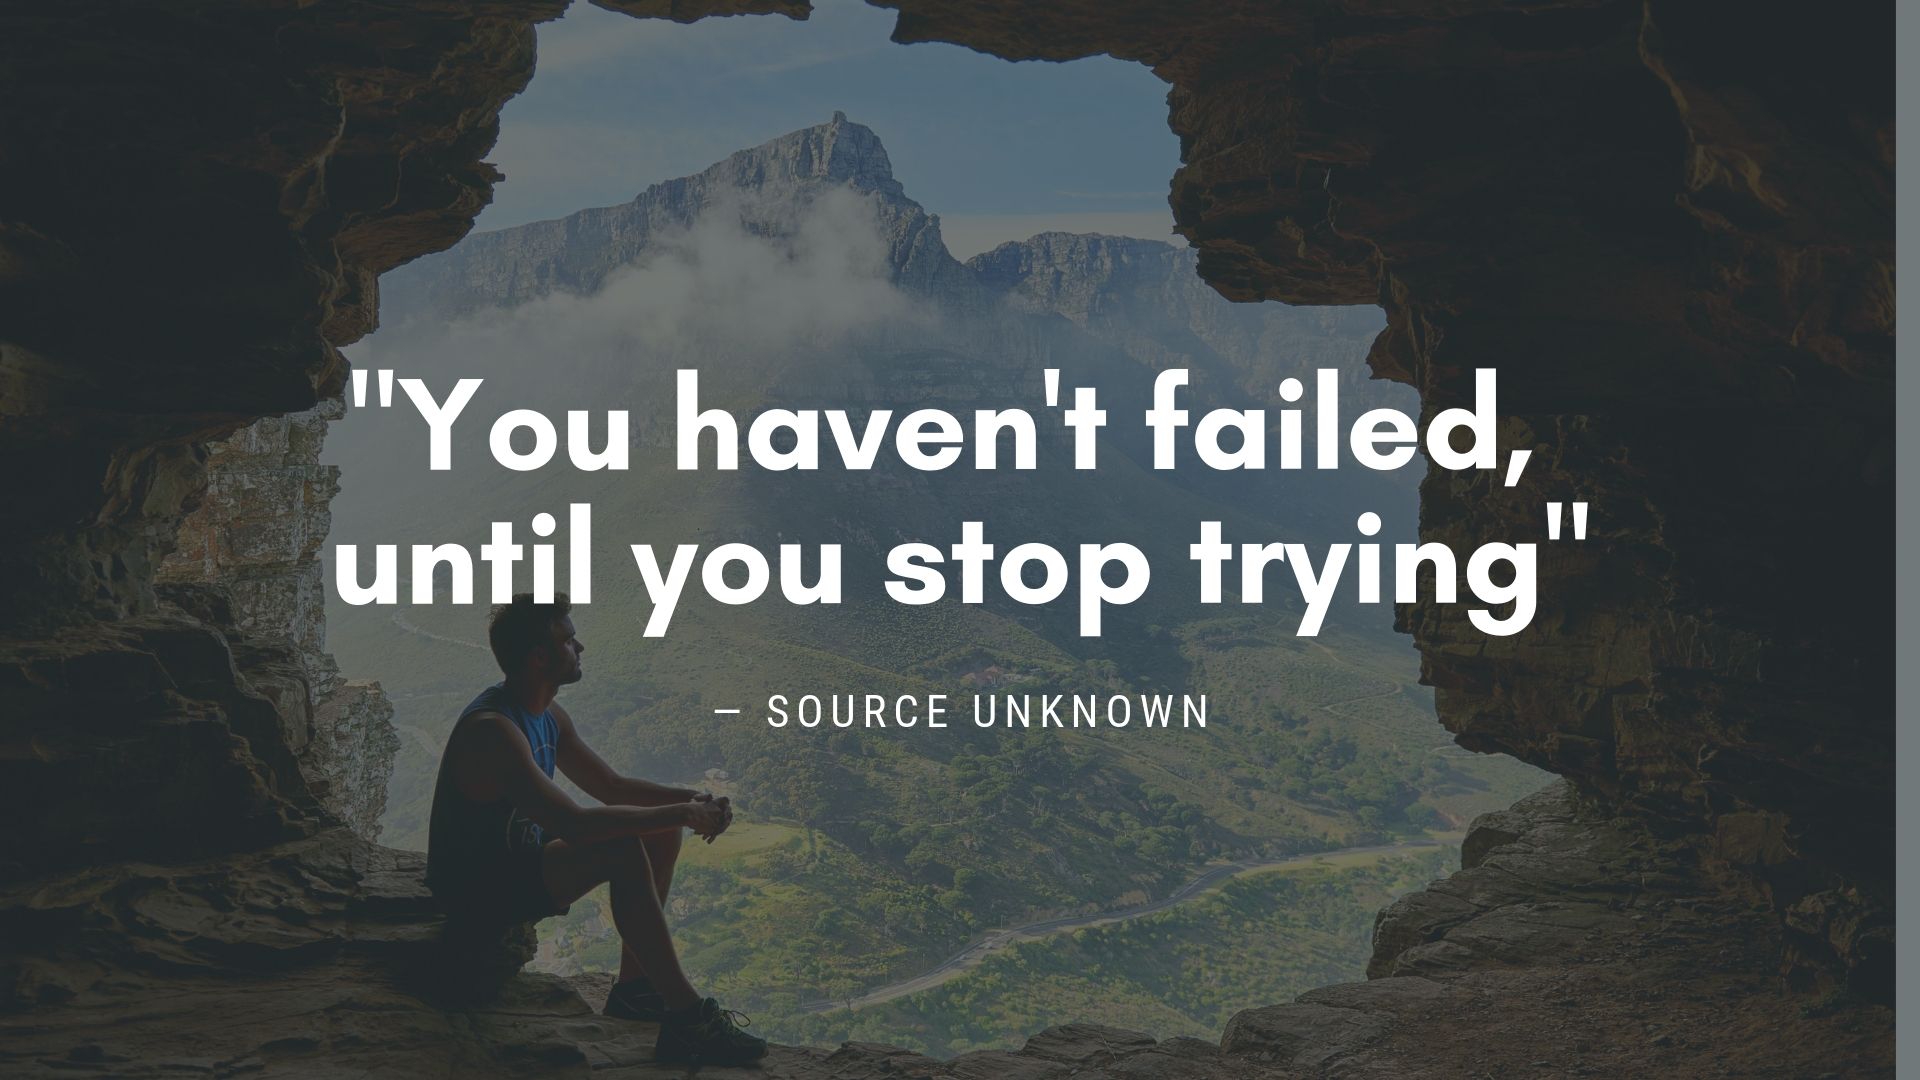 "You haven't failed, until you stop trying" ― Unknown